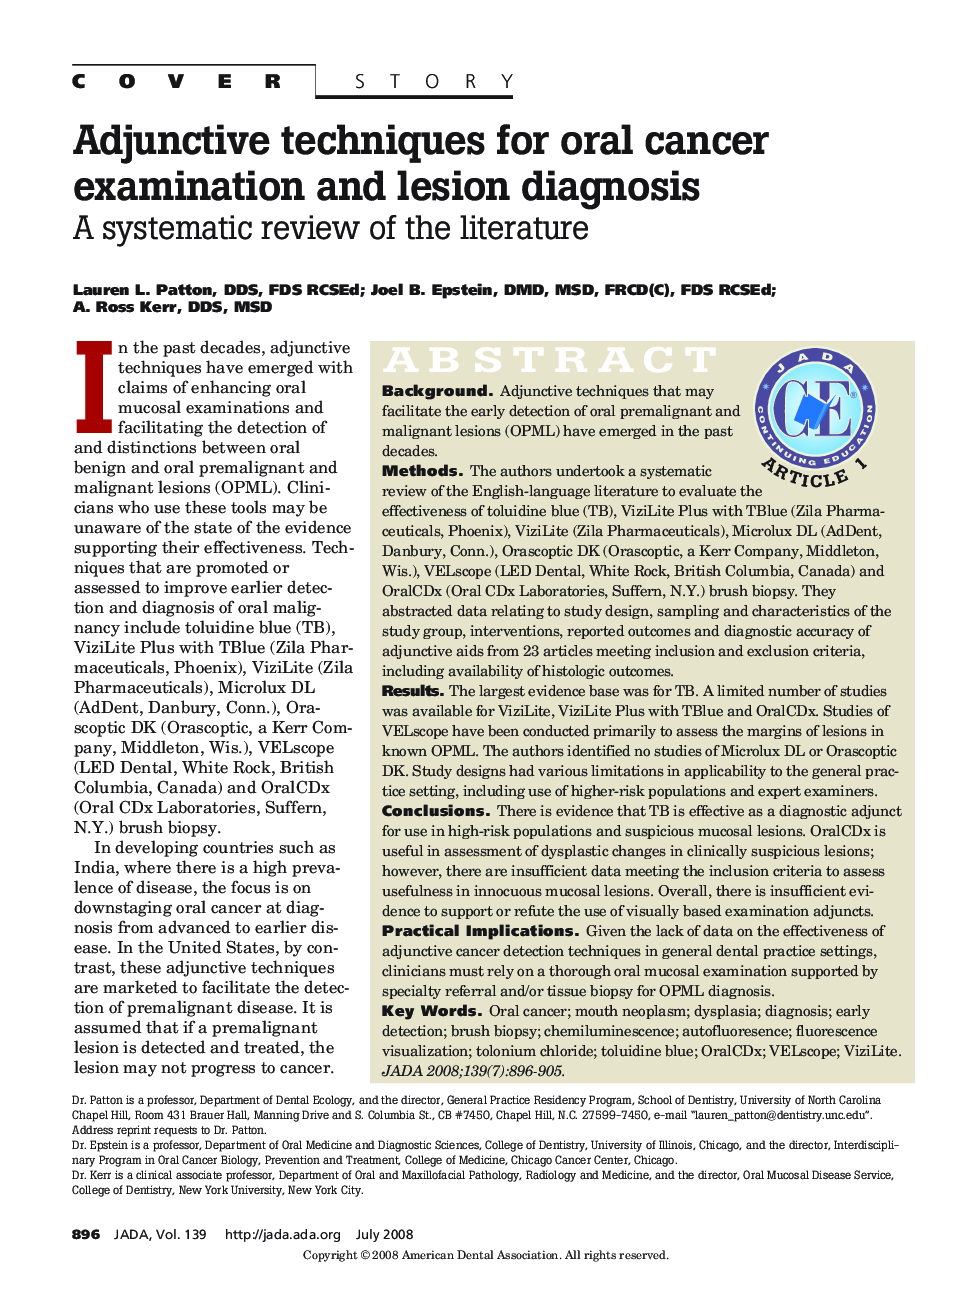 Adjunctive Techniques for Oral Cancer Examination and Lesion Diagnosis : A Systematic Review of the Literature